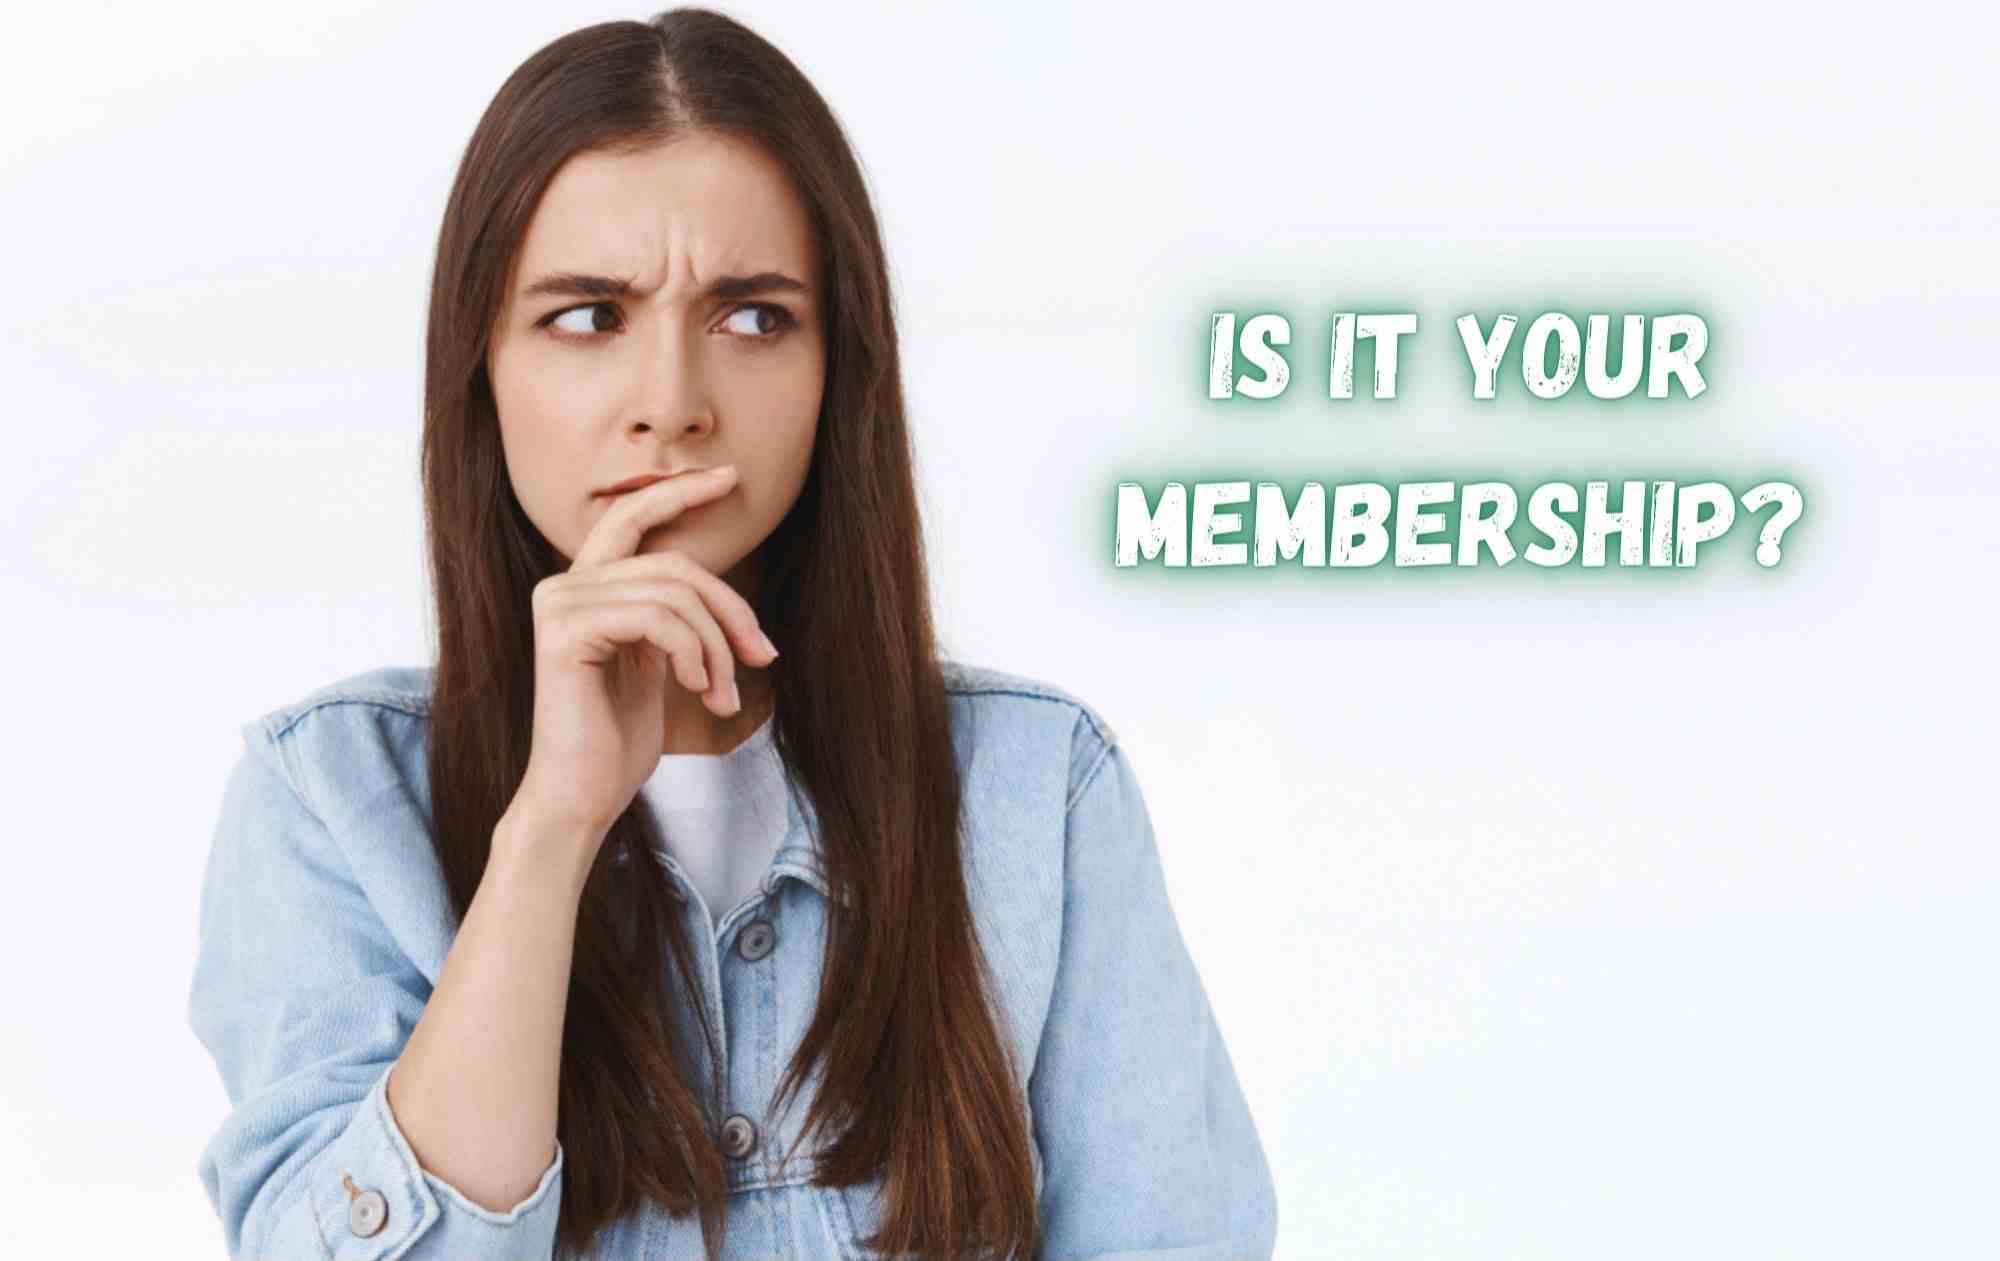 Is it your membership